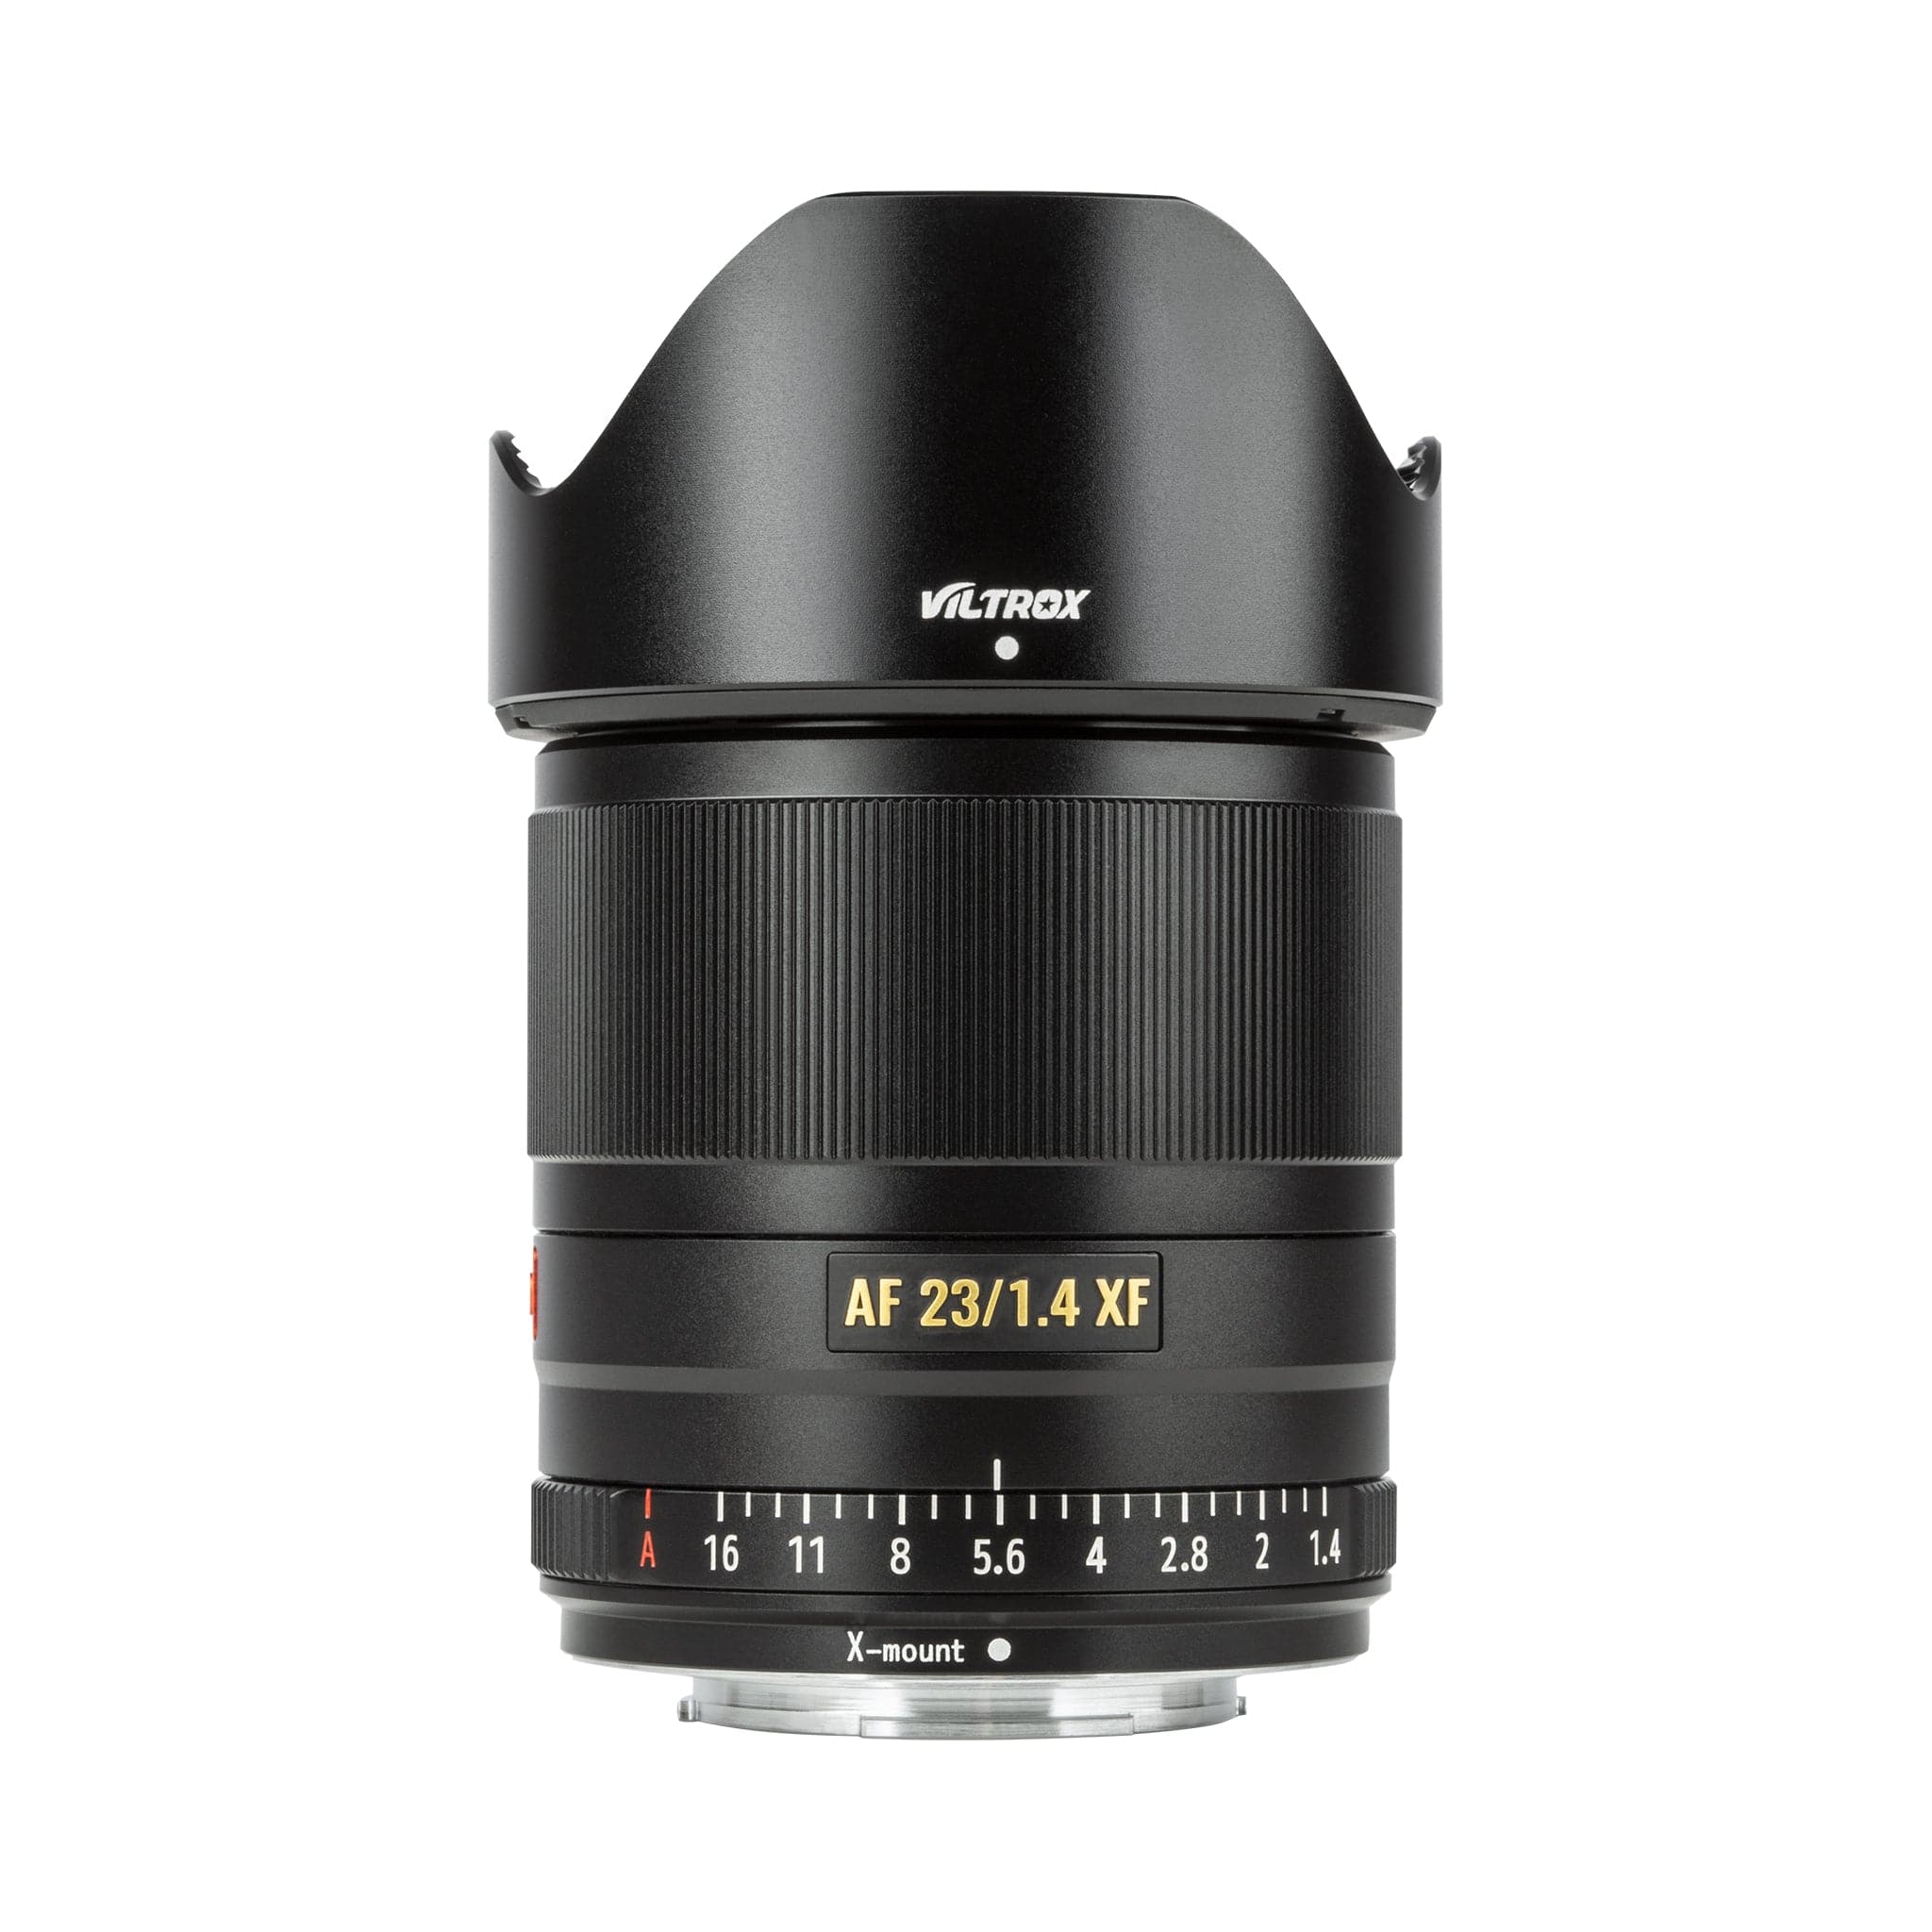 Viltrox Compact 23mm f1.4 X-mount Auto Focus APS-C lens for Fujifilm Camera  with Large Aperture